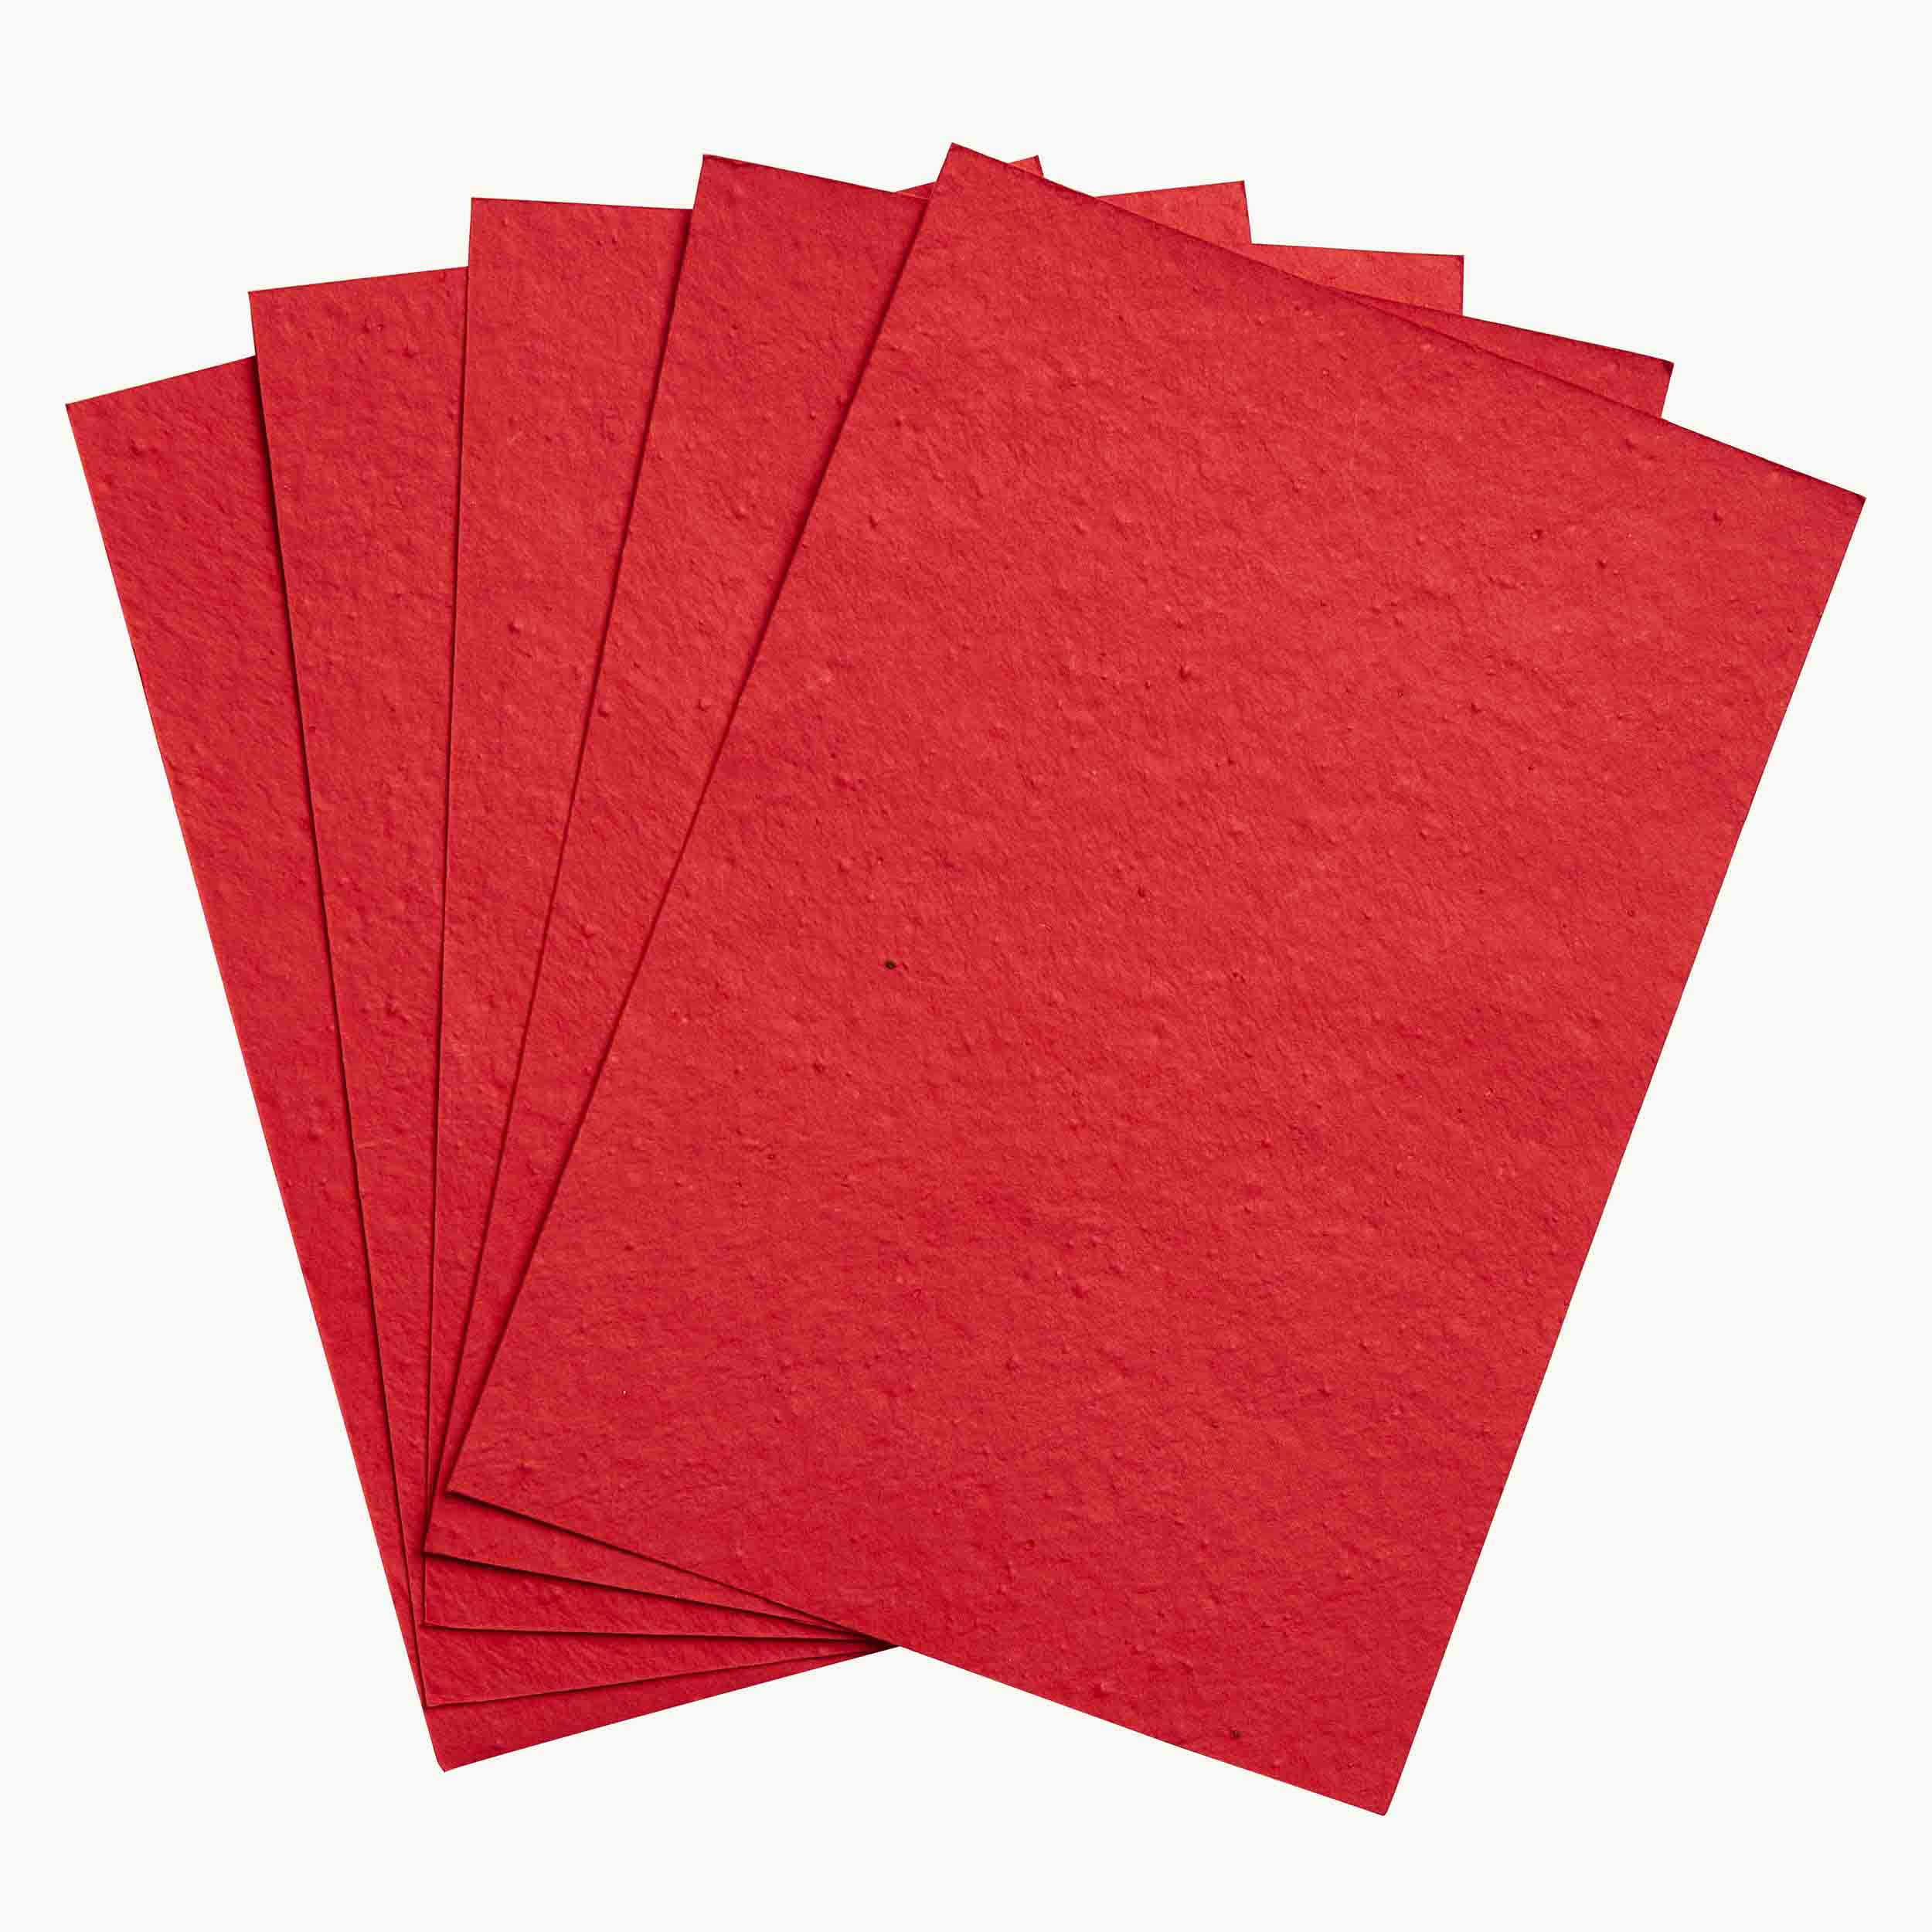 8.5 x 11 Bright Red Plantable Seed Paper